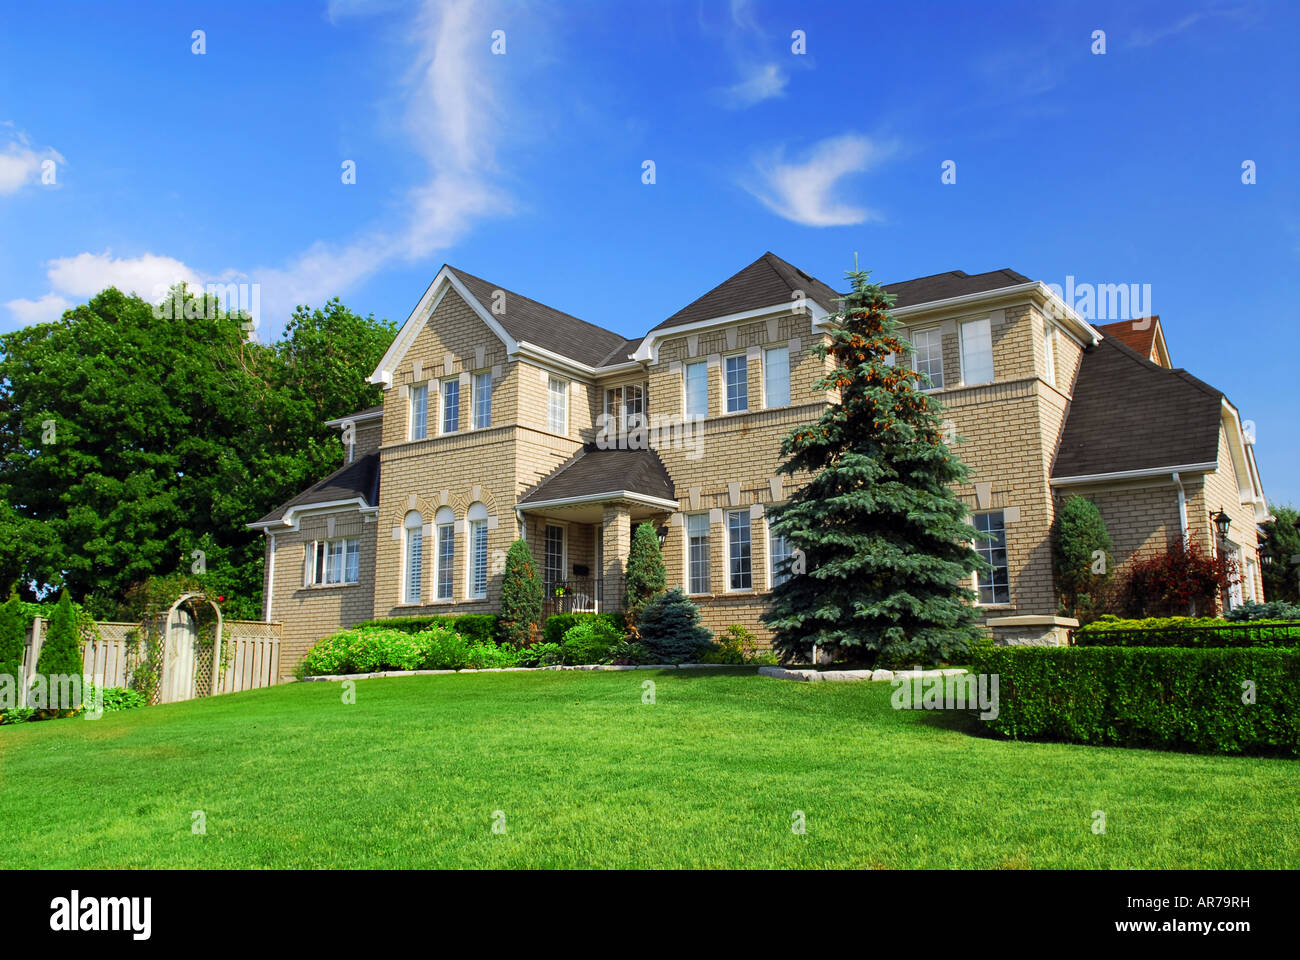 Large upscale residential home with bright green lawn and blue sky Stock Photo